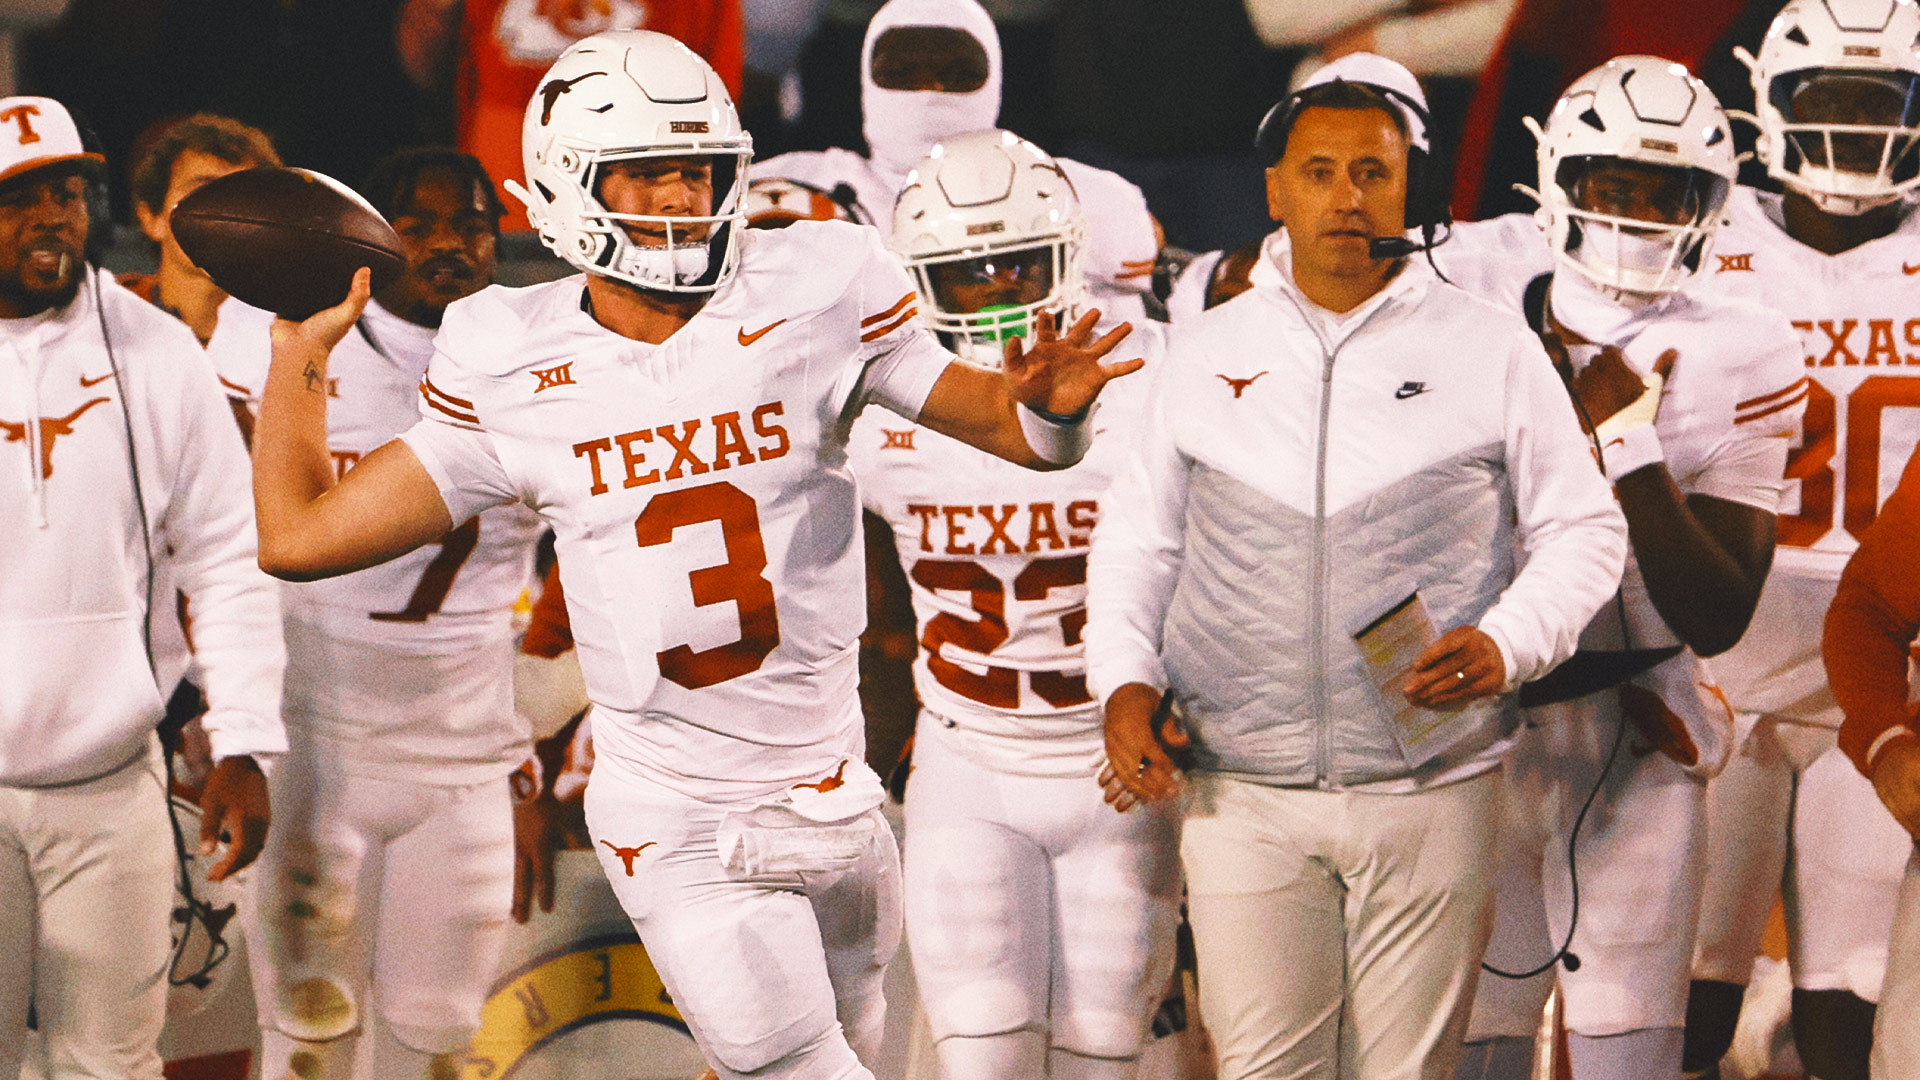 Texas stays alone atop Big 12 after pulling away from Iowa State for a 26-16 win